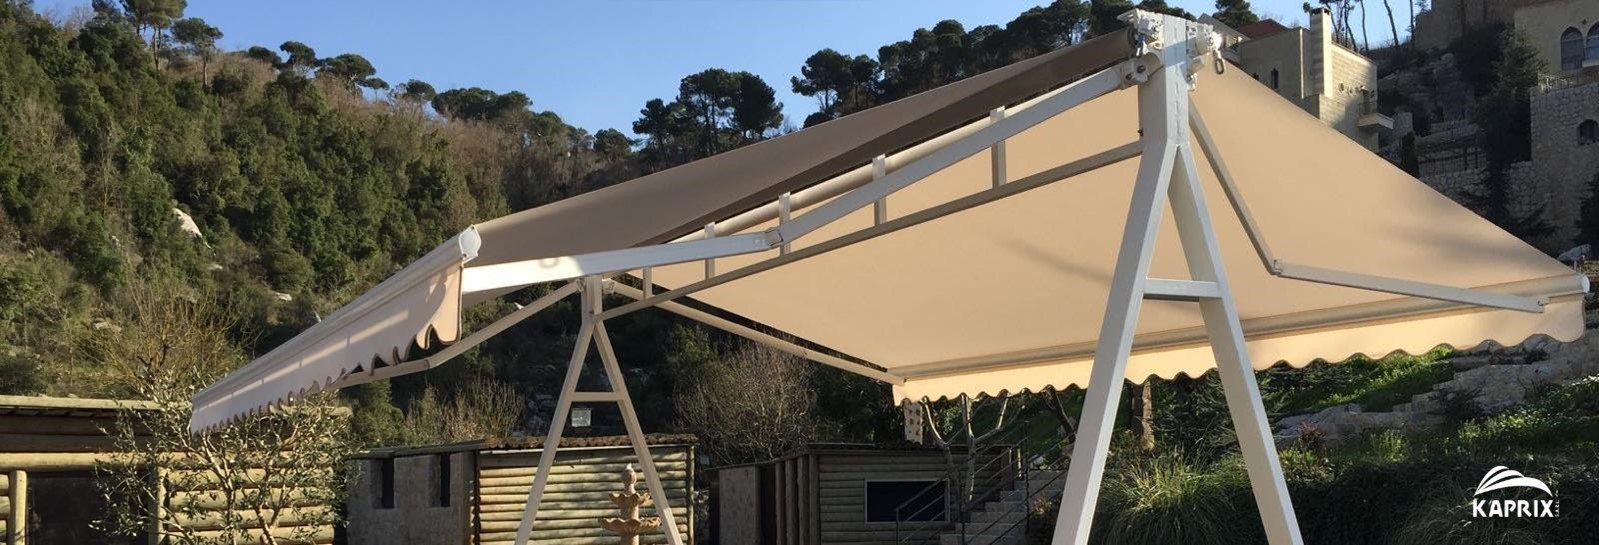 awnings for homes